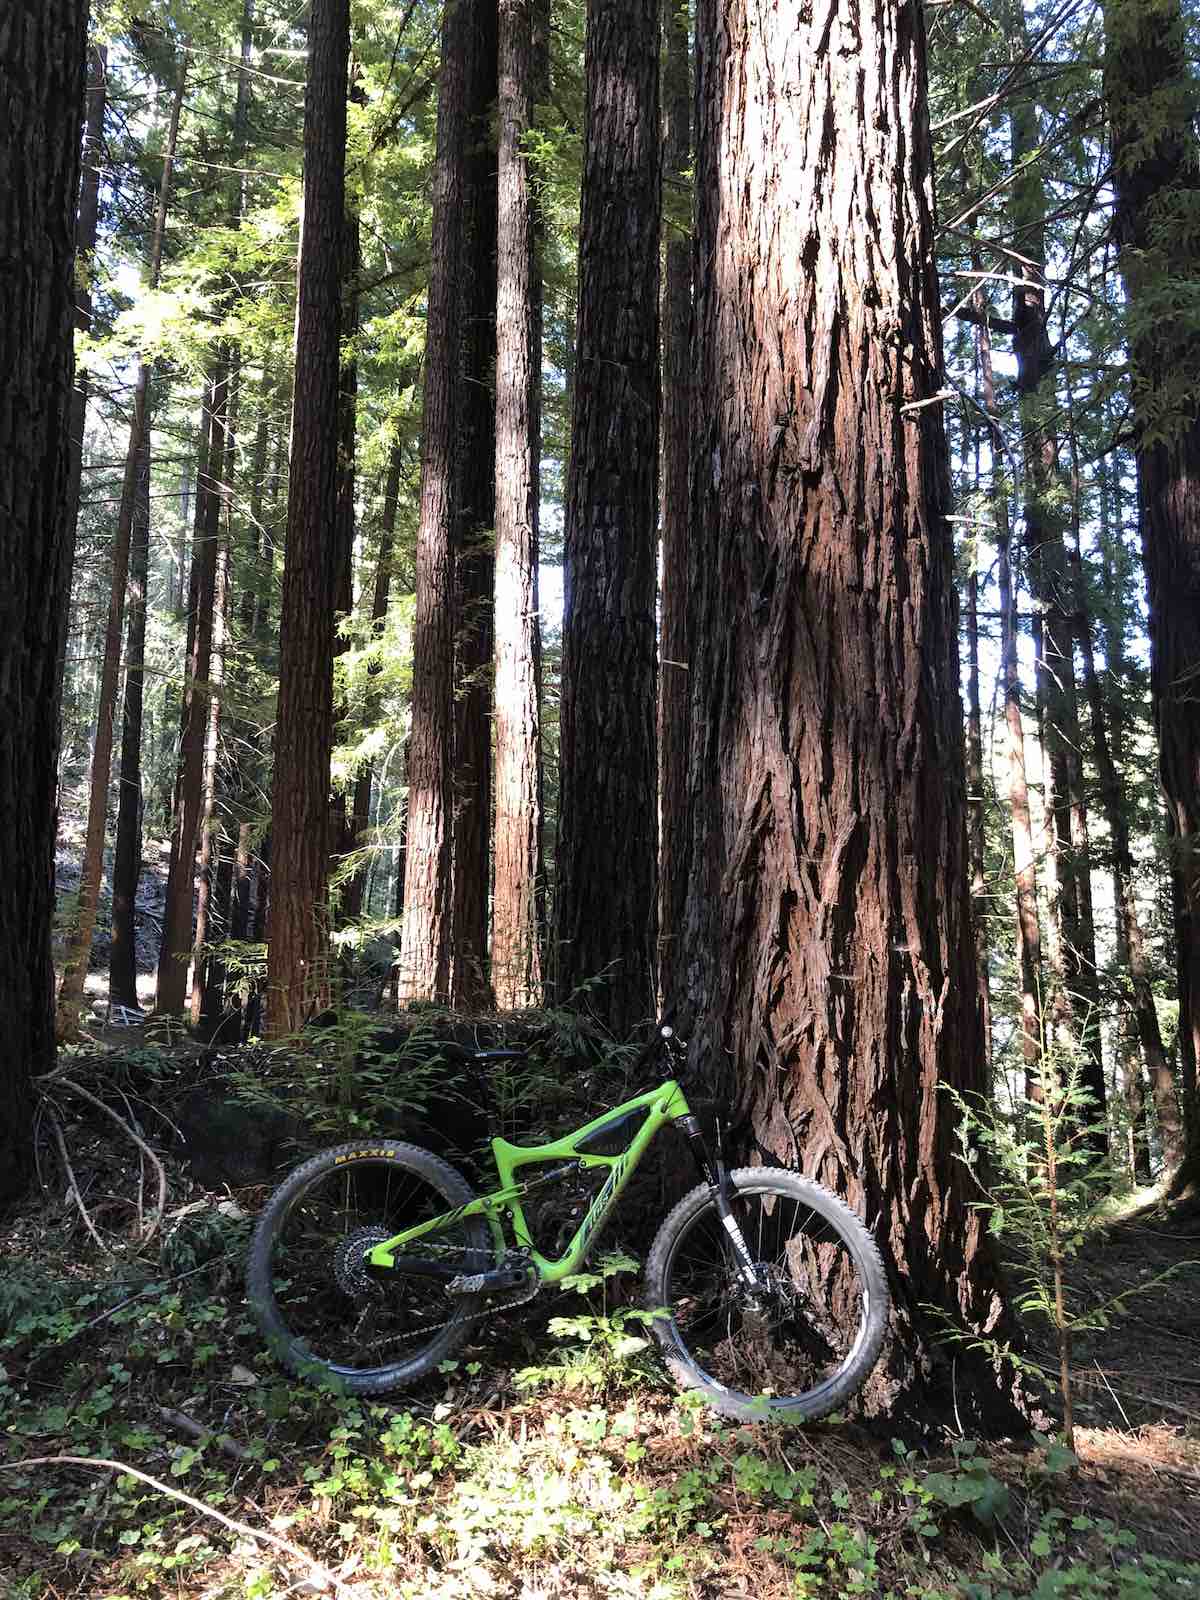 Bikerumor pic of the day a bright green mountain bike sits under a giant redwood tree in the santa cruz mountains of california